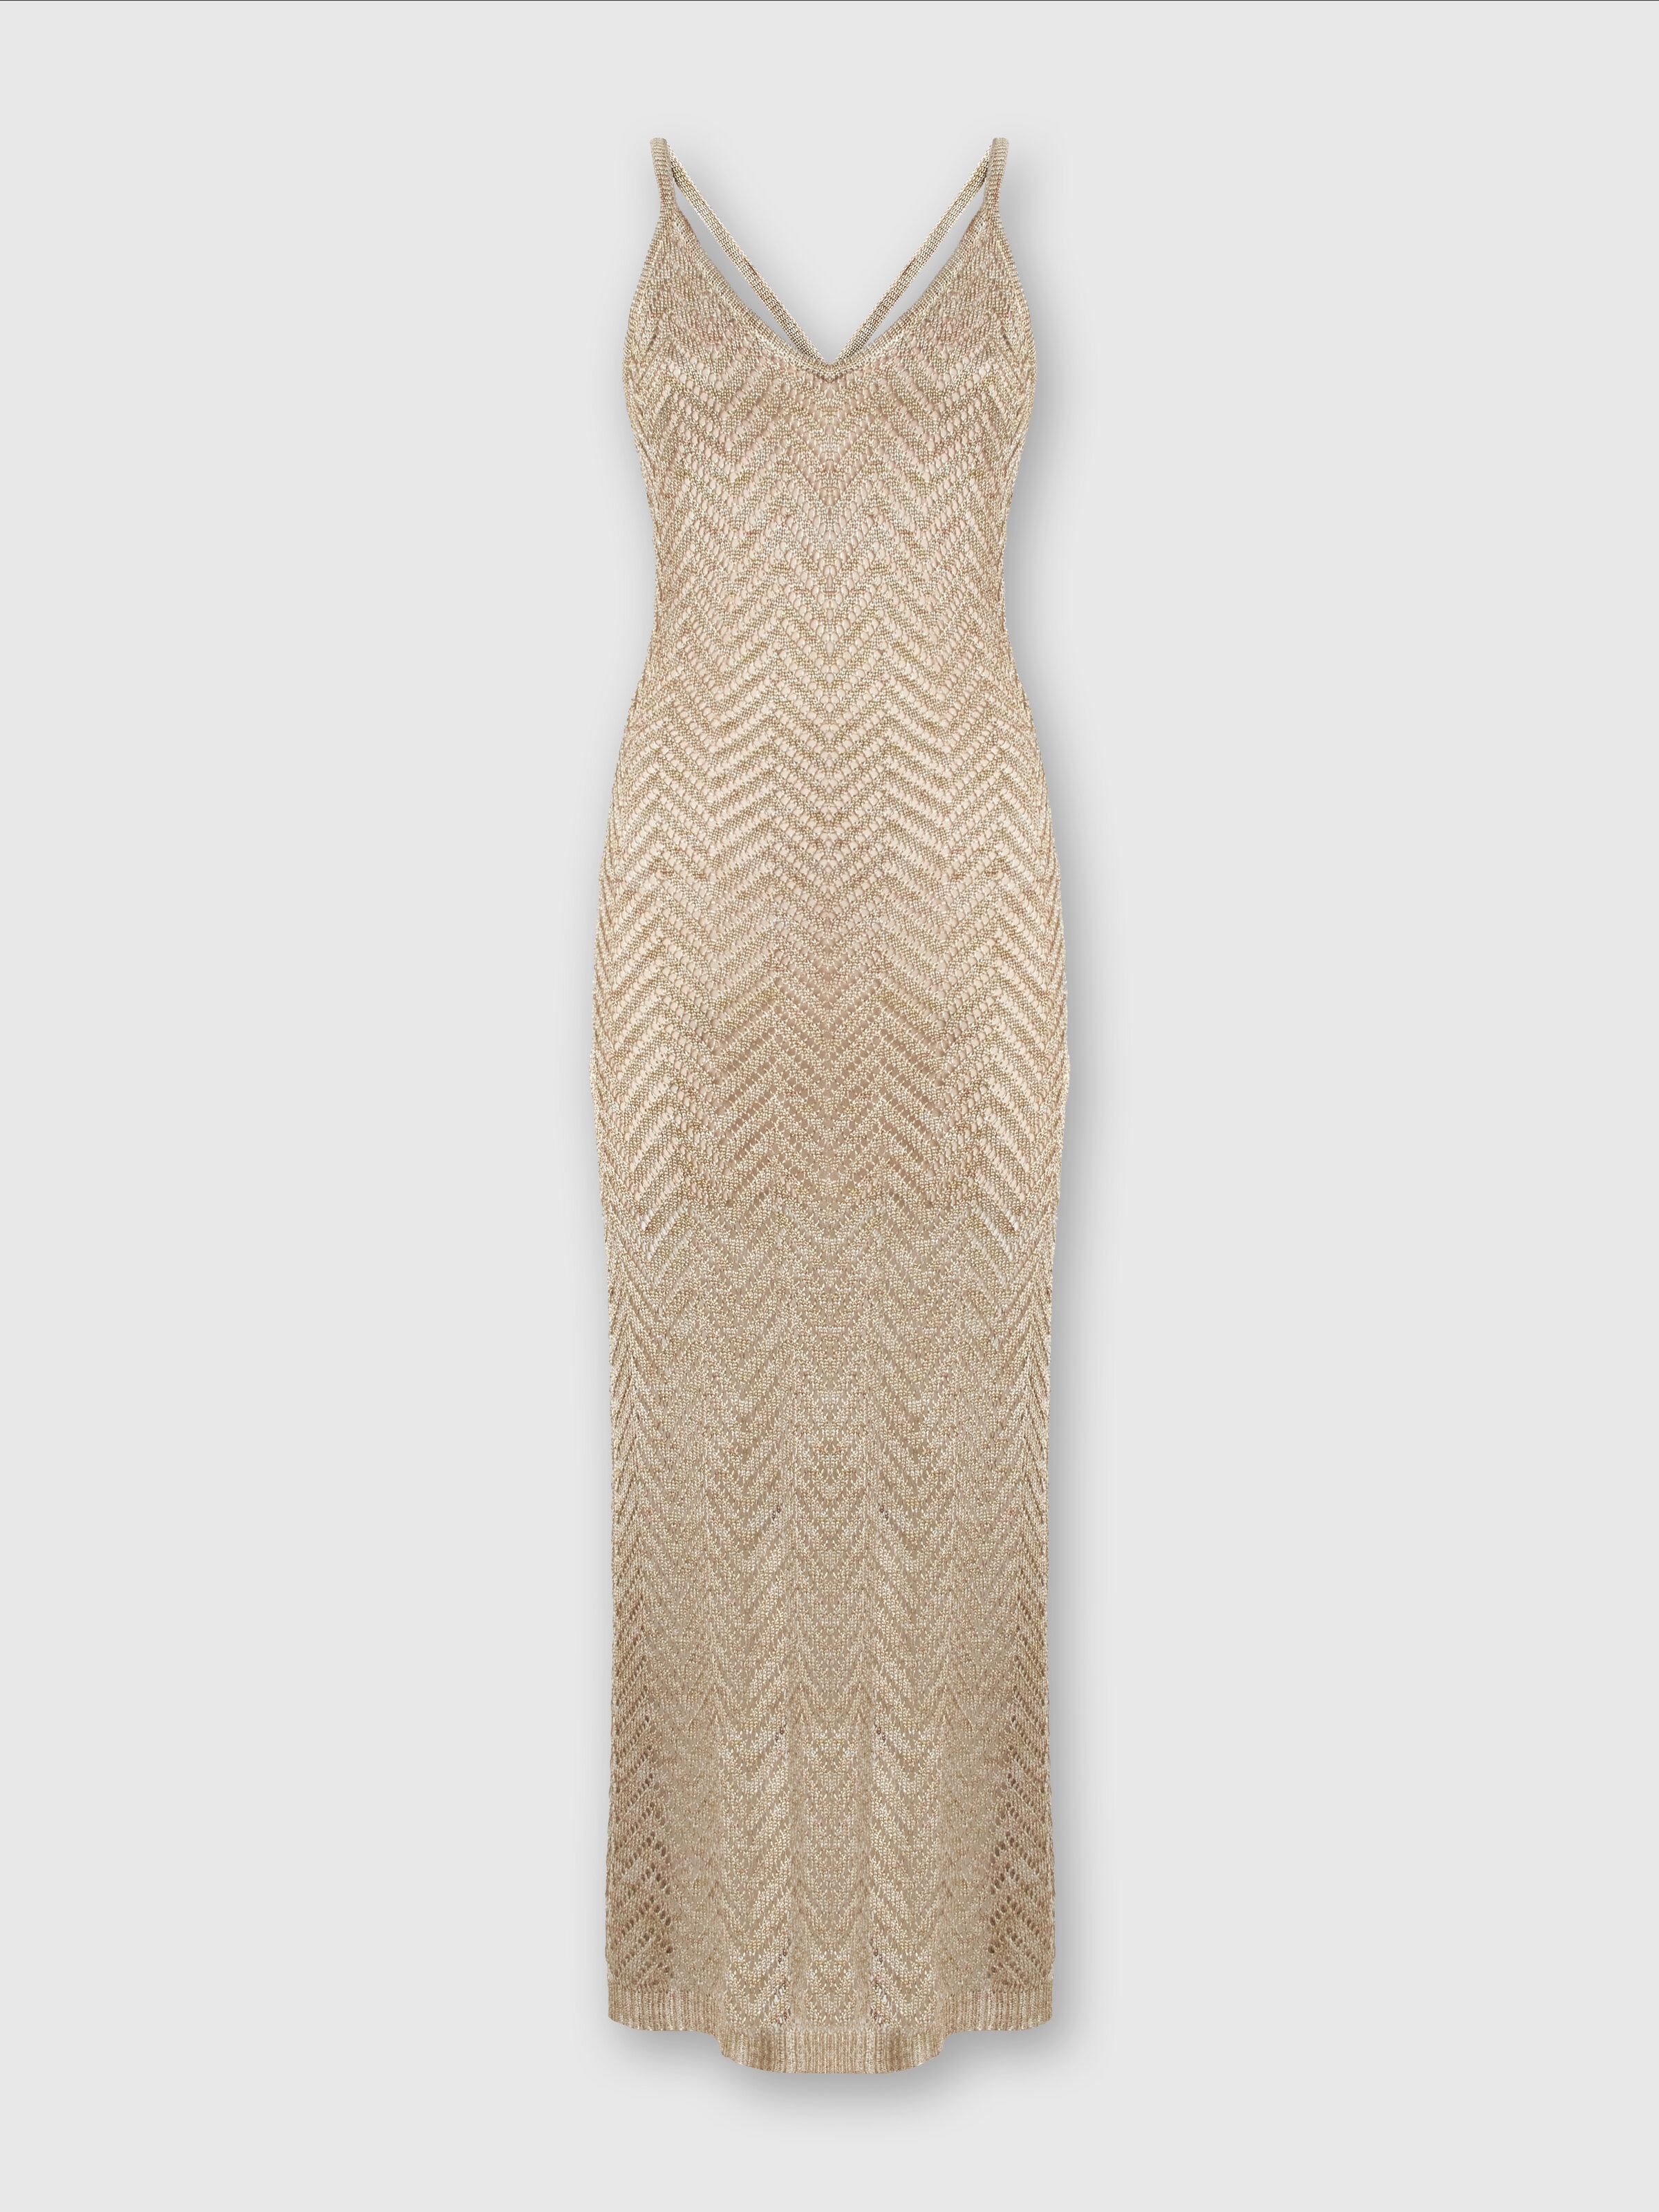 Dress in zigzag knit with crochet-effect weave, Gold - 0